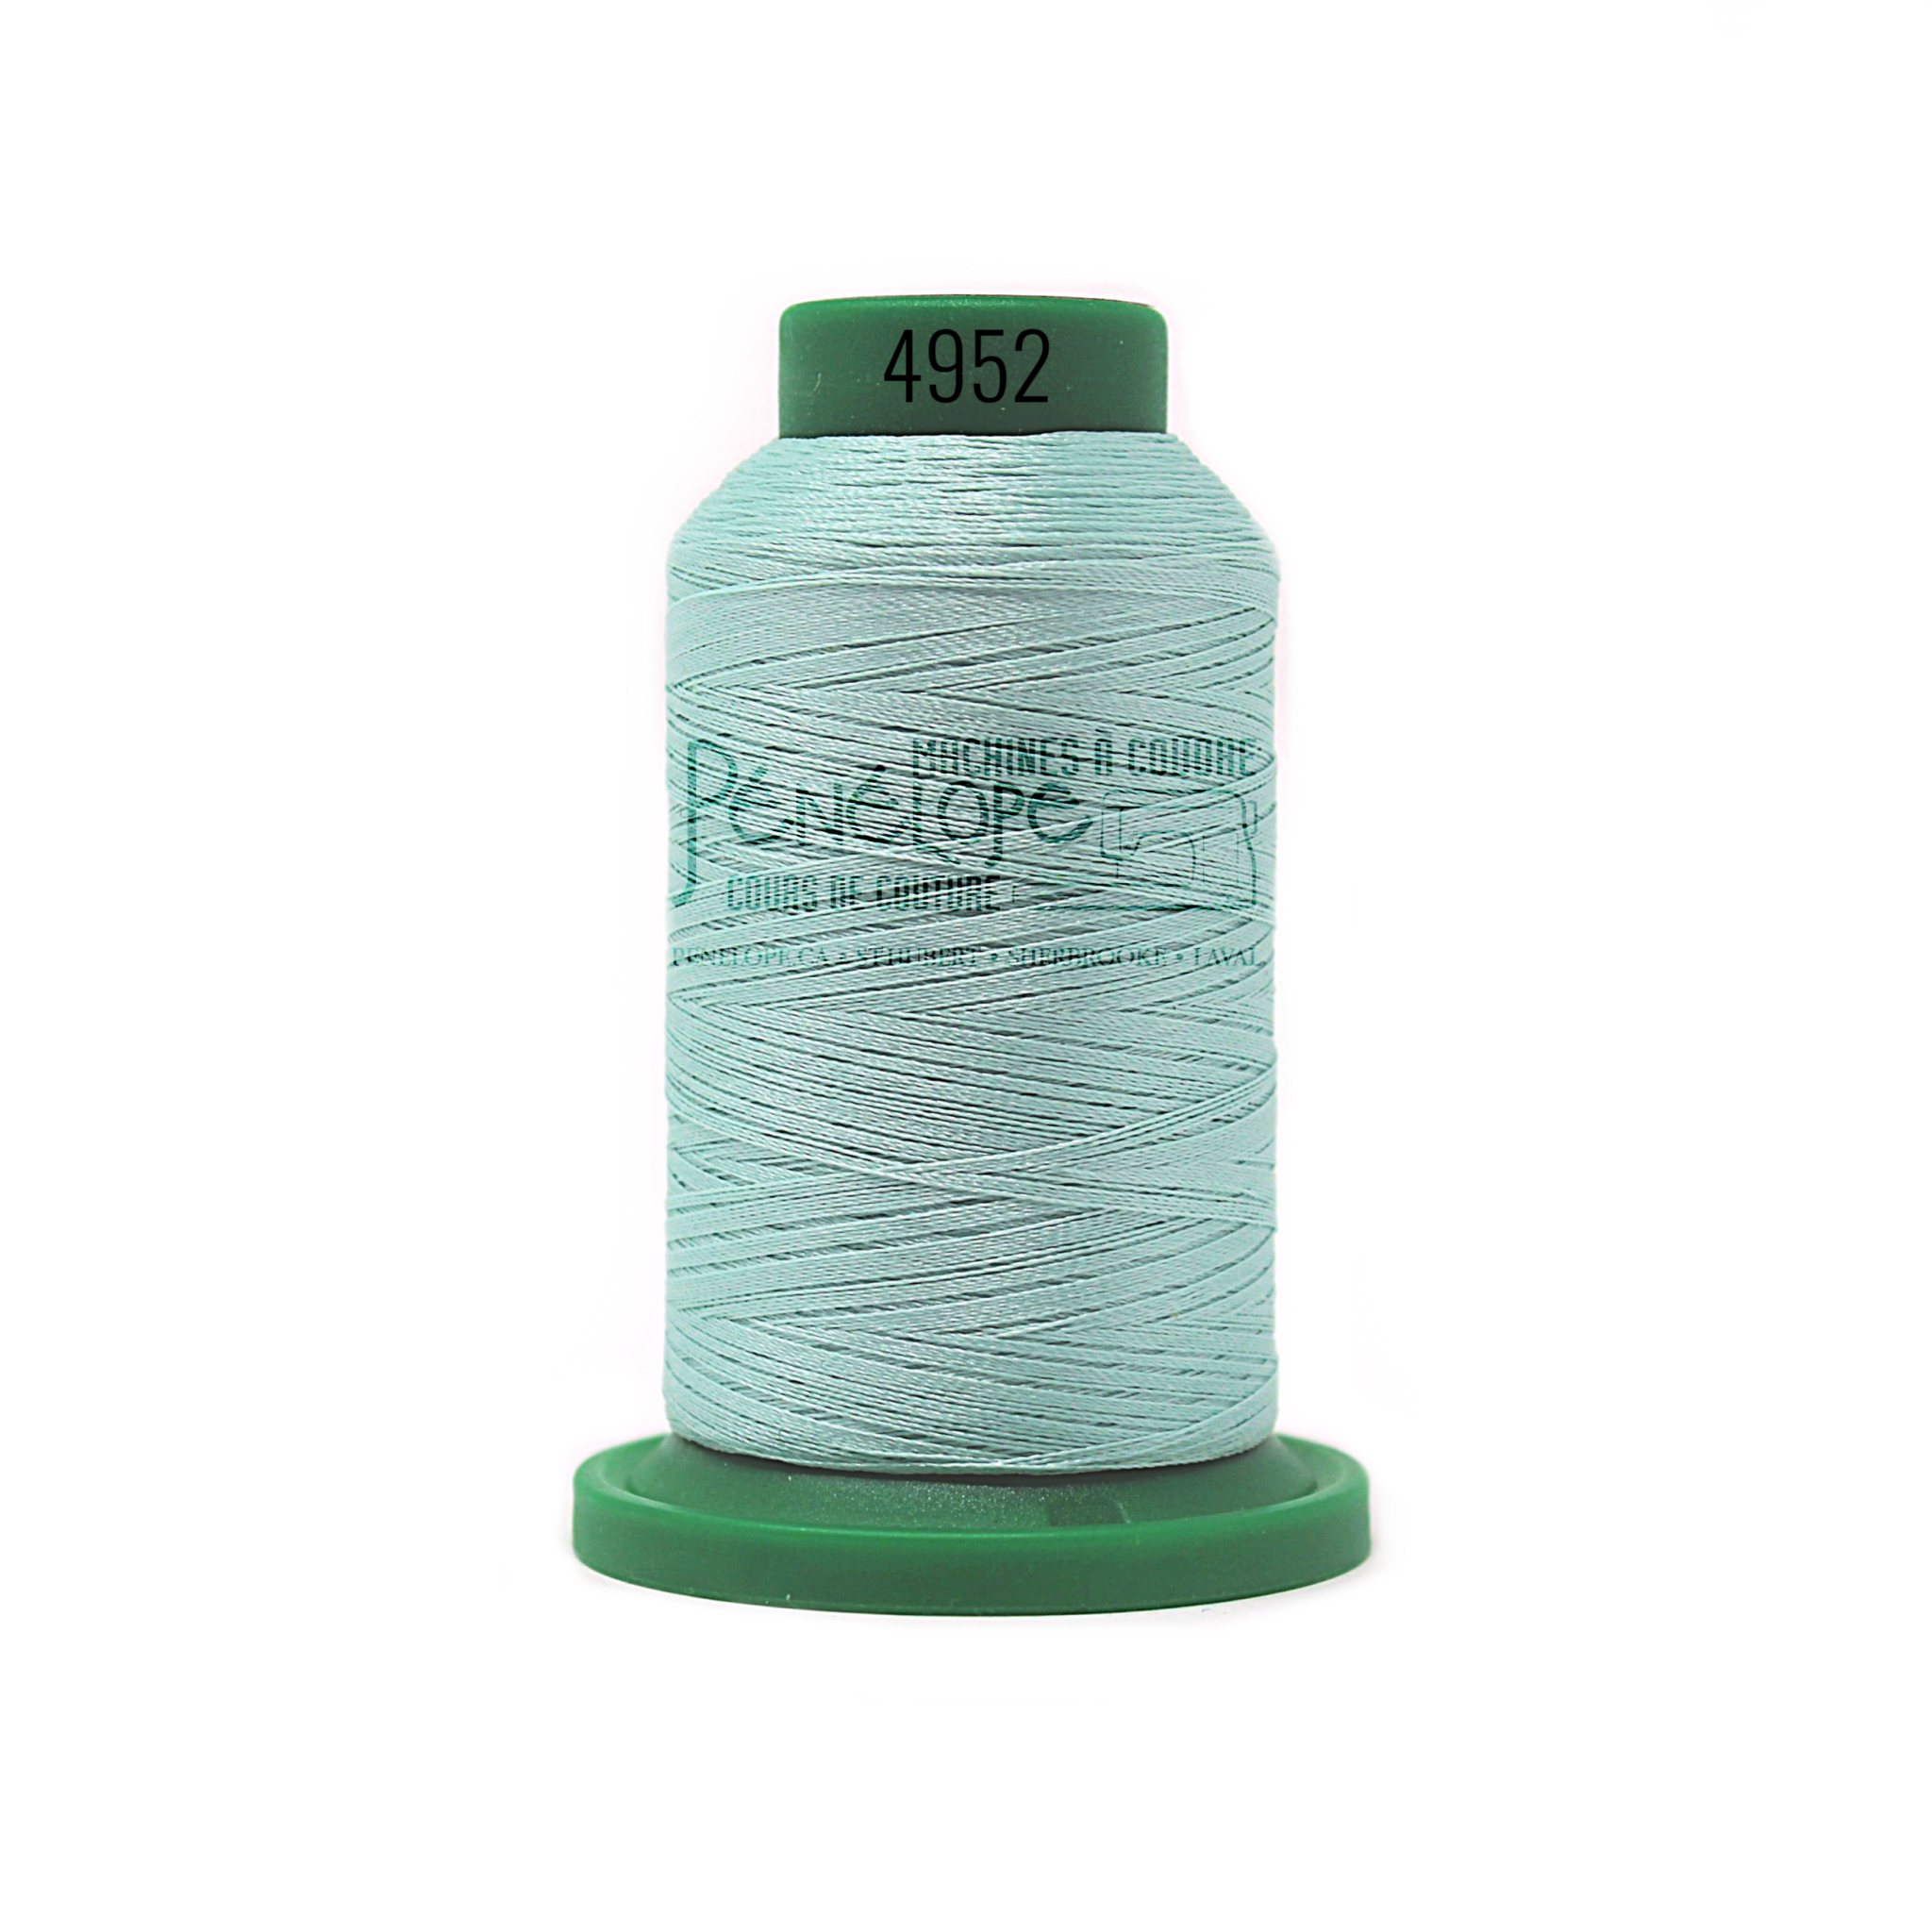 Isacord Isacord sewing and embroidery thread 4952